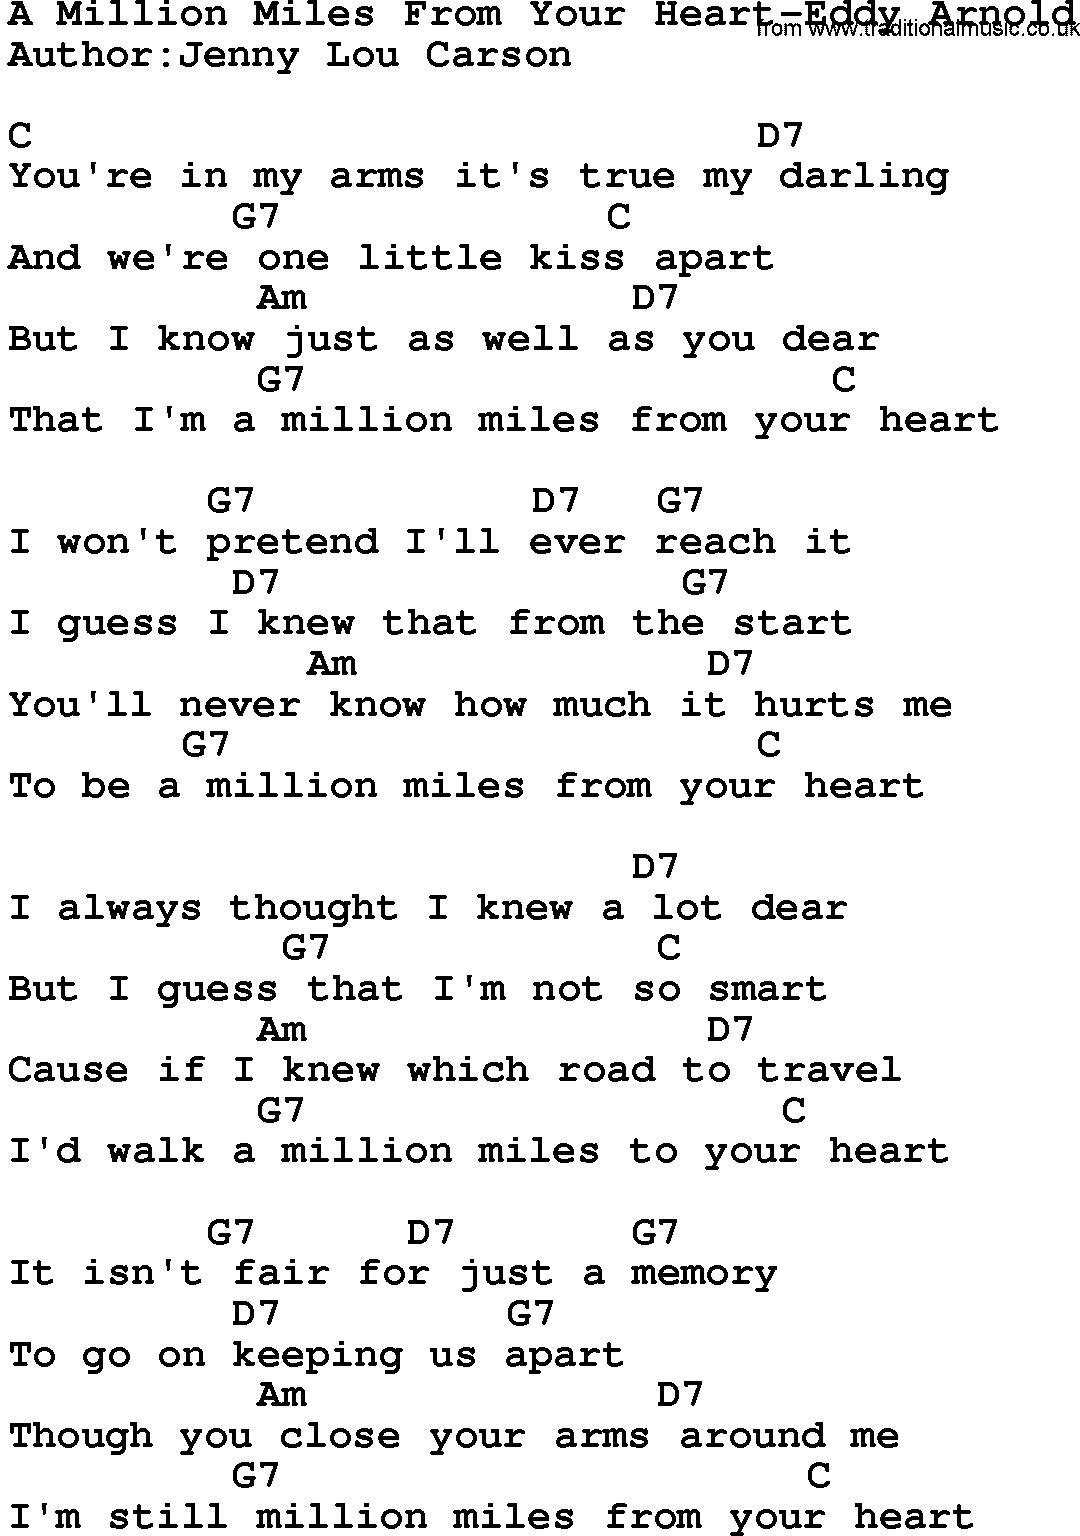 Country music song: A Million Miles From Your Heart-Eddy Arnold lyrics and chords